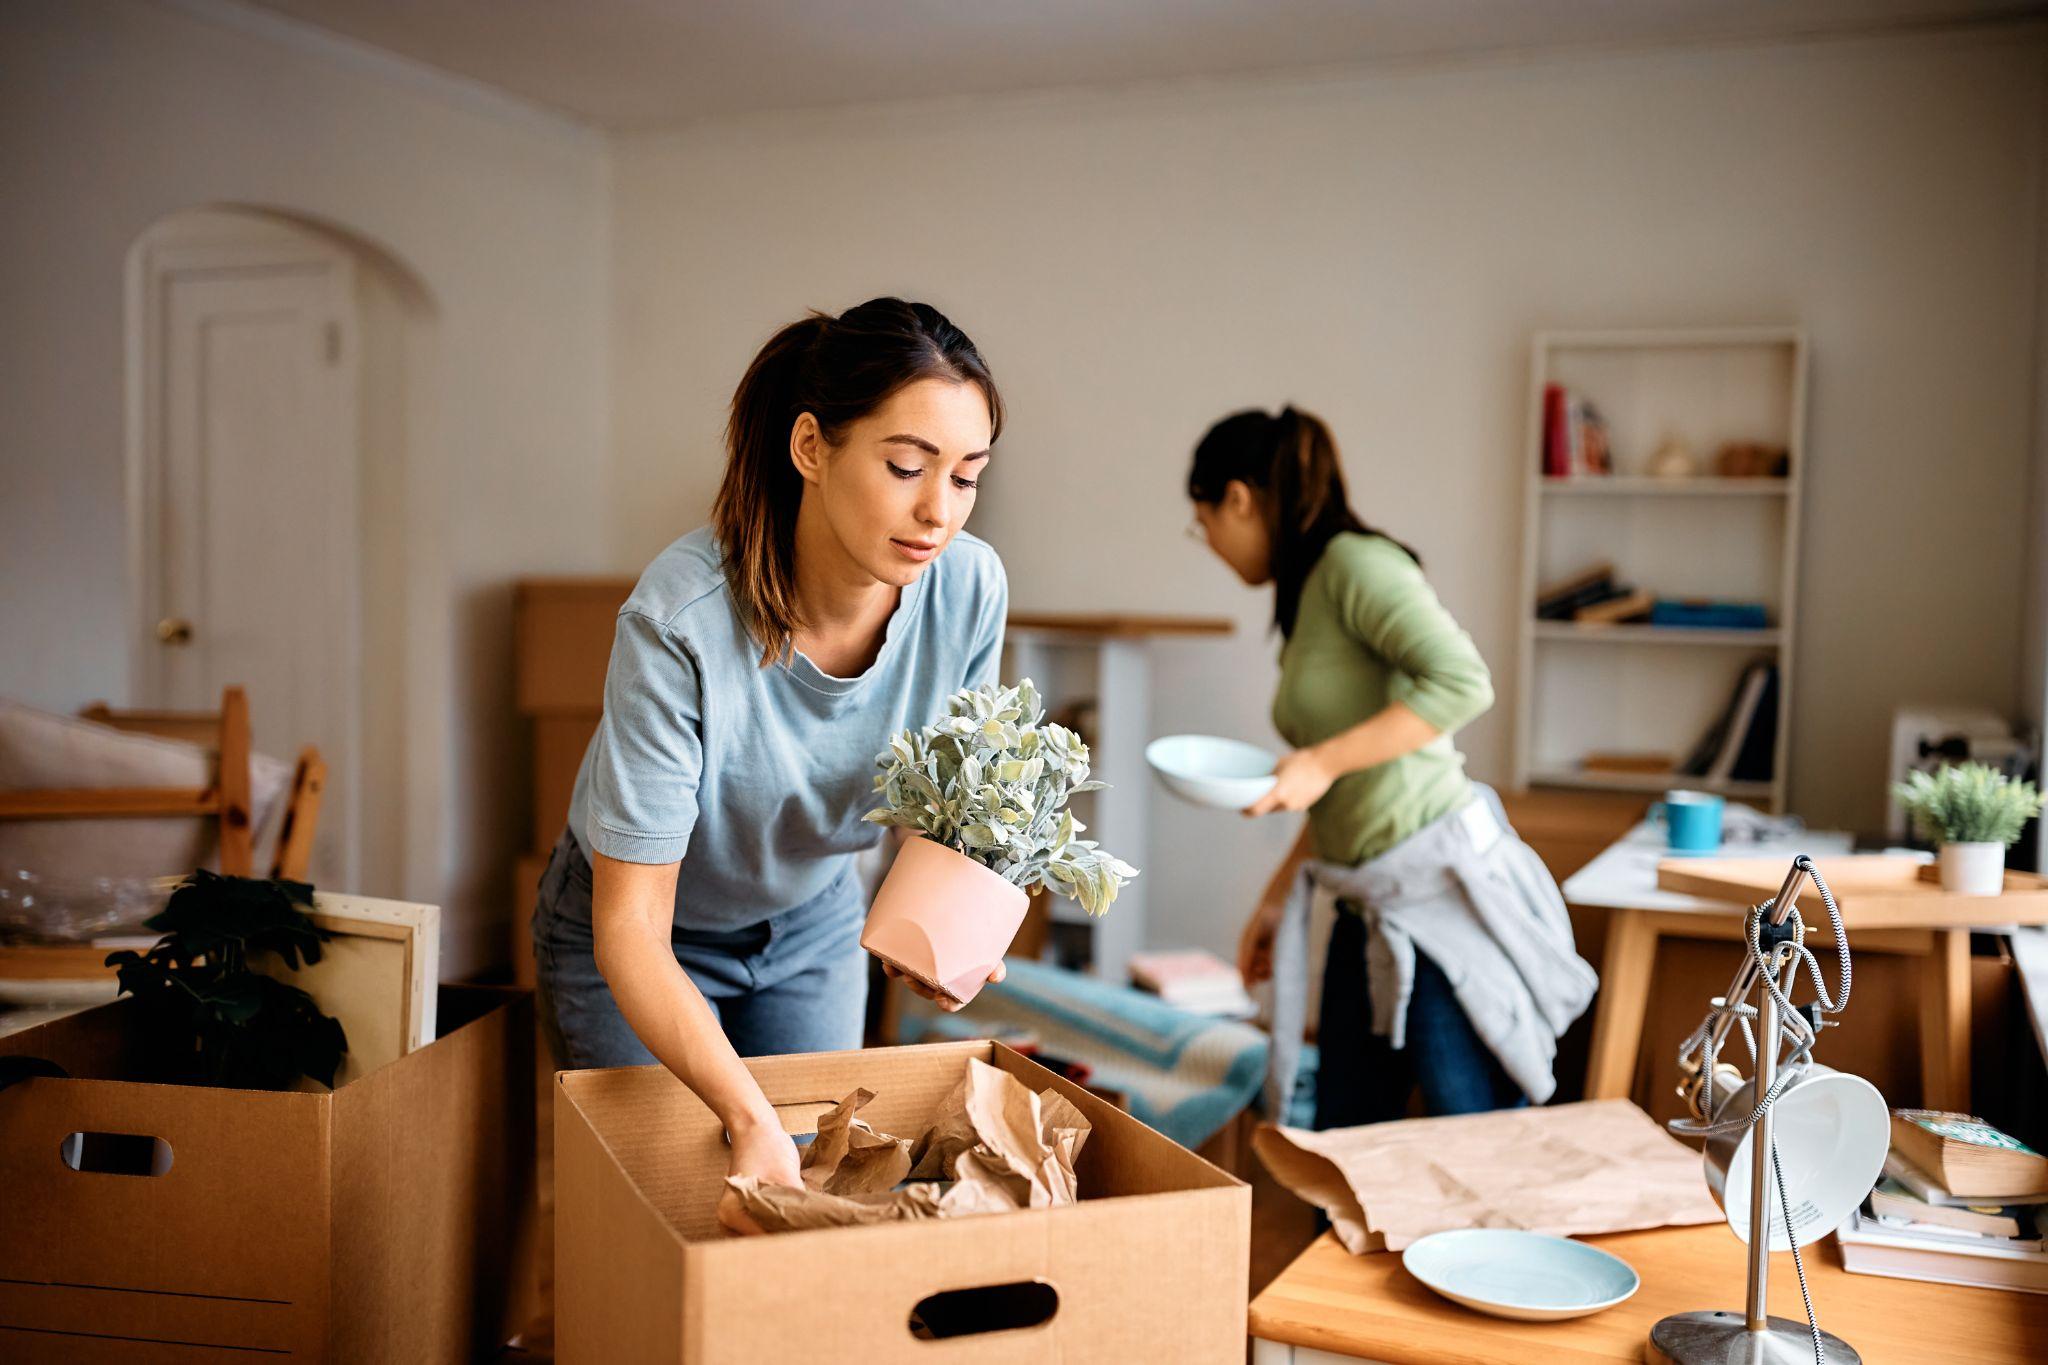 two young women packing boxes in an apartment getting ready to move